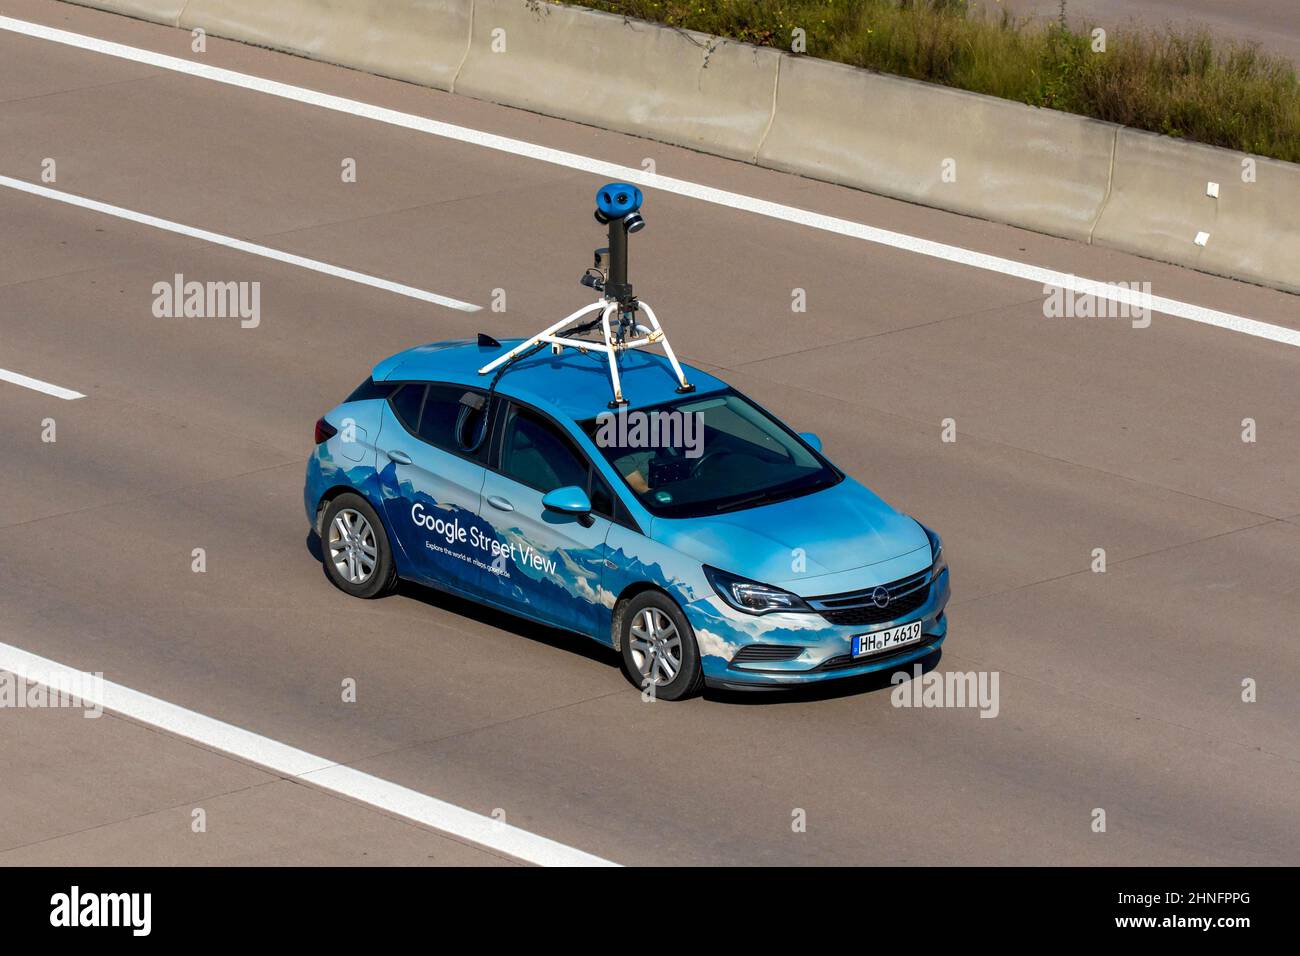 Opel Astra, Google Street View camera vehicle driving and filming on the motorway, Germany Stock Photo